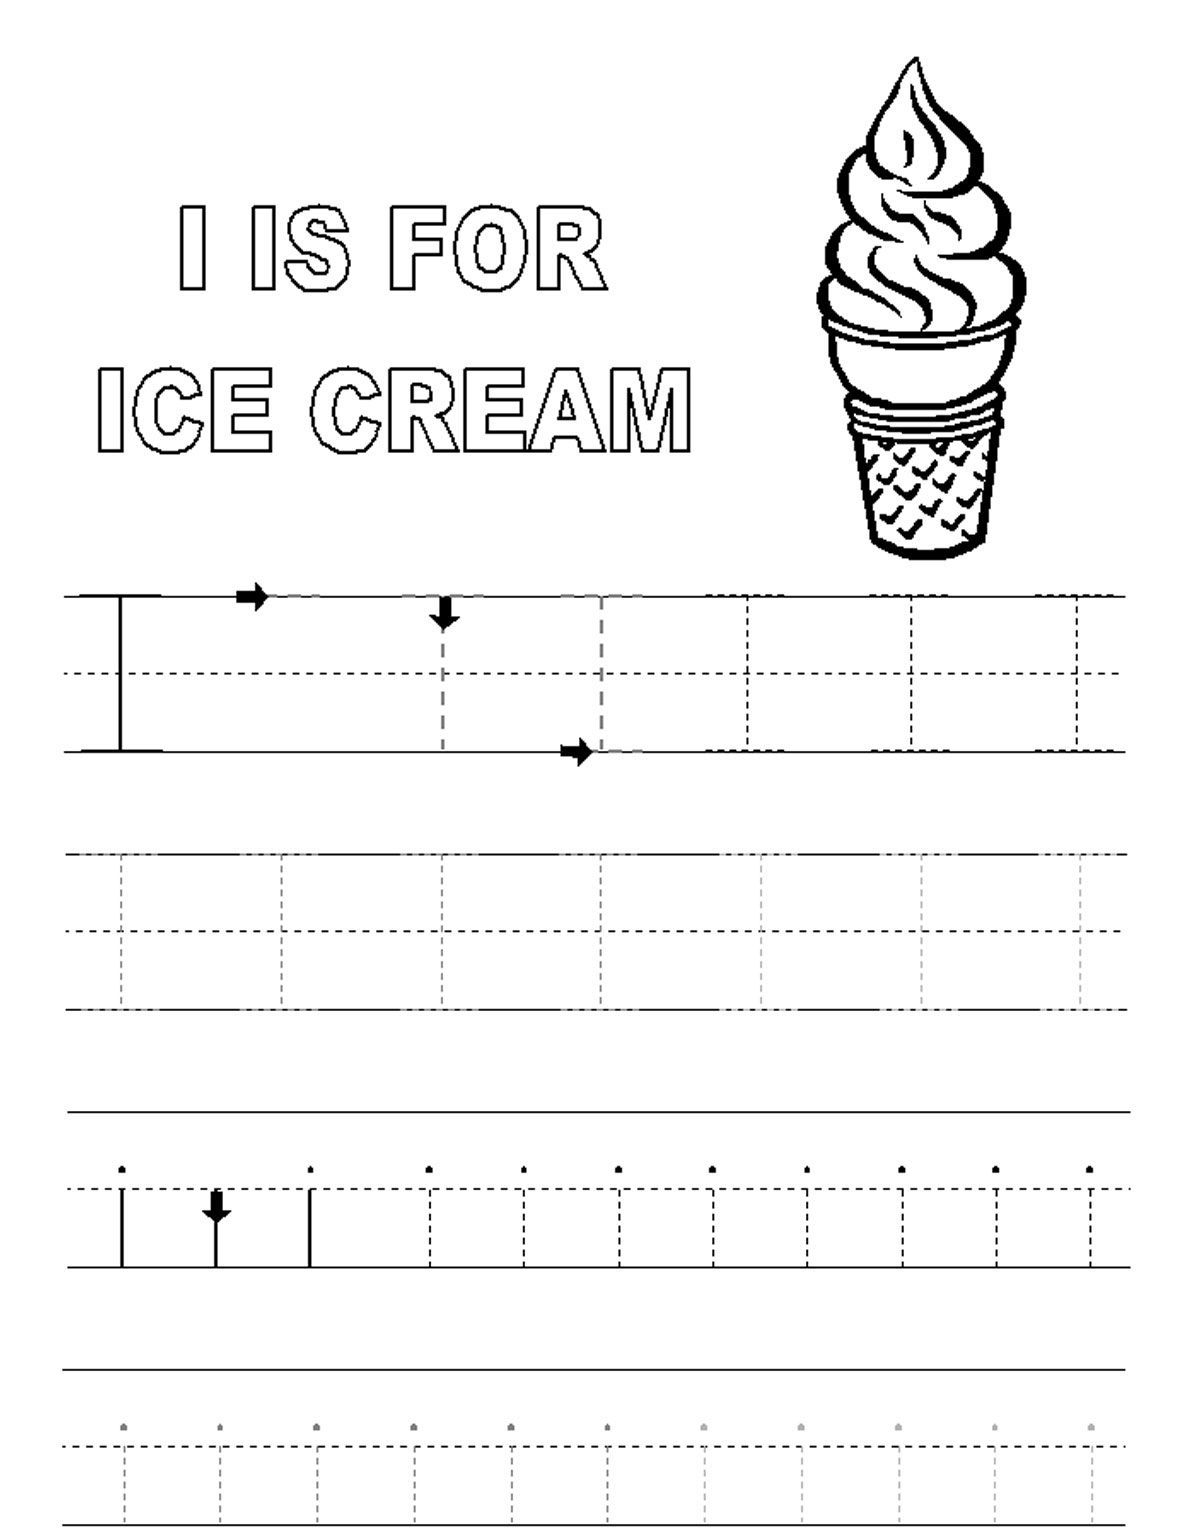 Alphabet Tracer Pages I Ice Cream - Http://www.kidscp inside Letter H Worksheets Soft School